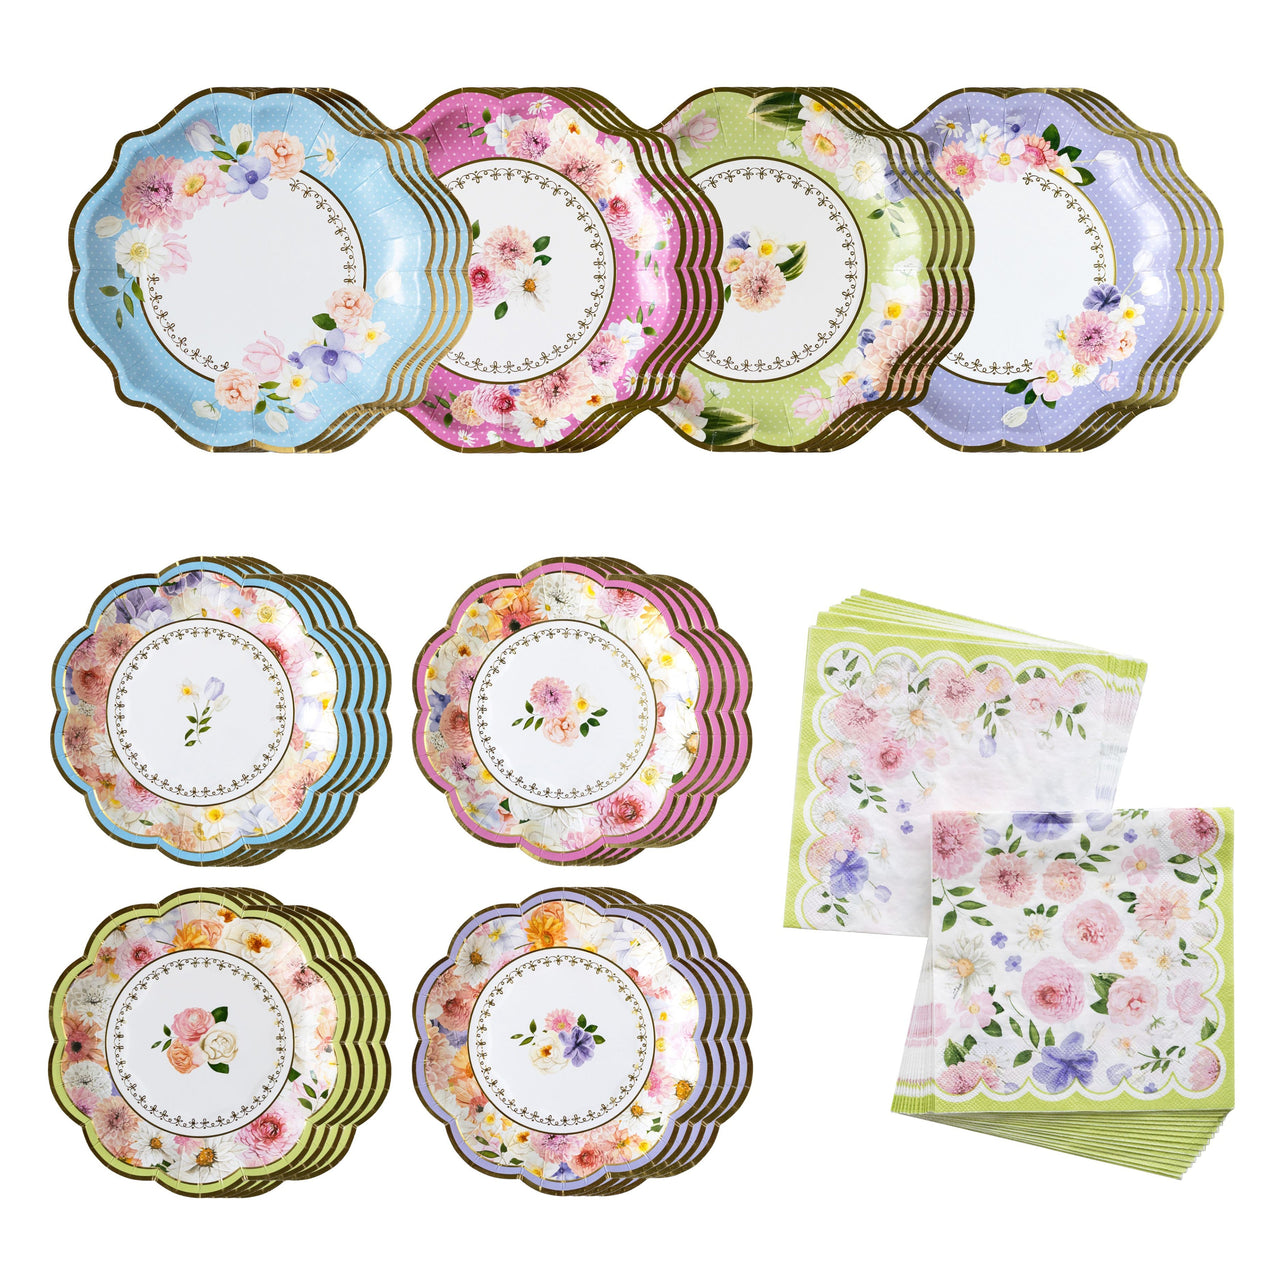 Tea Time Party 78 Piece Party Tableware Set (16 Guests) Atlernate silo